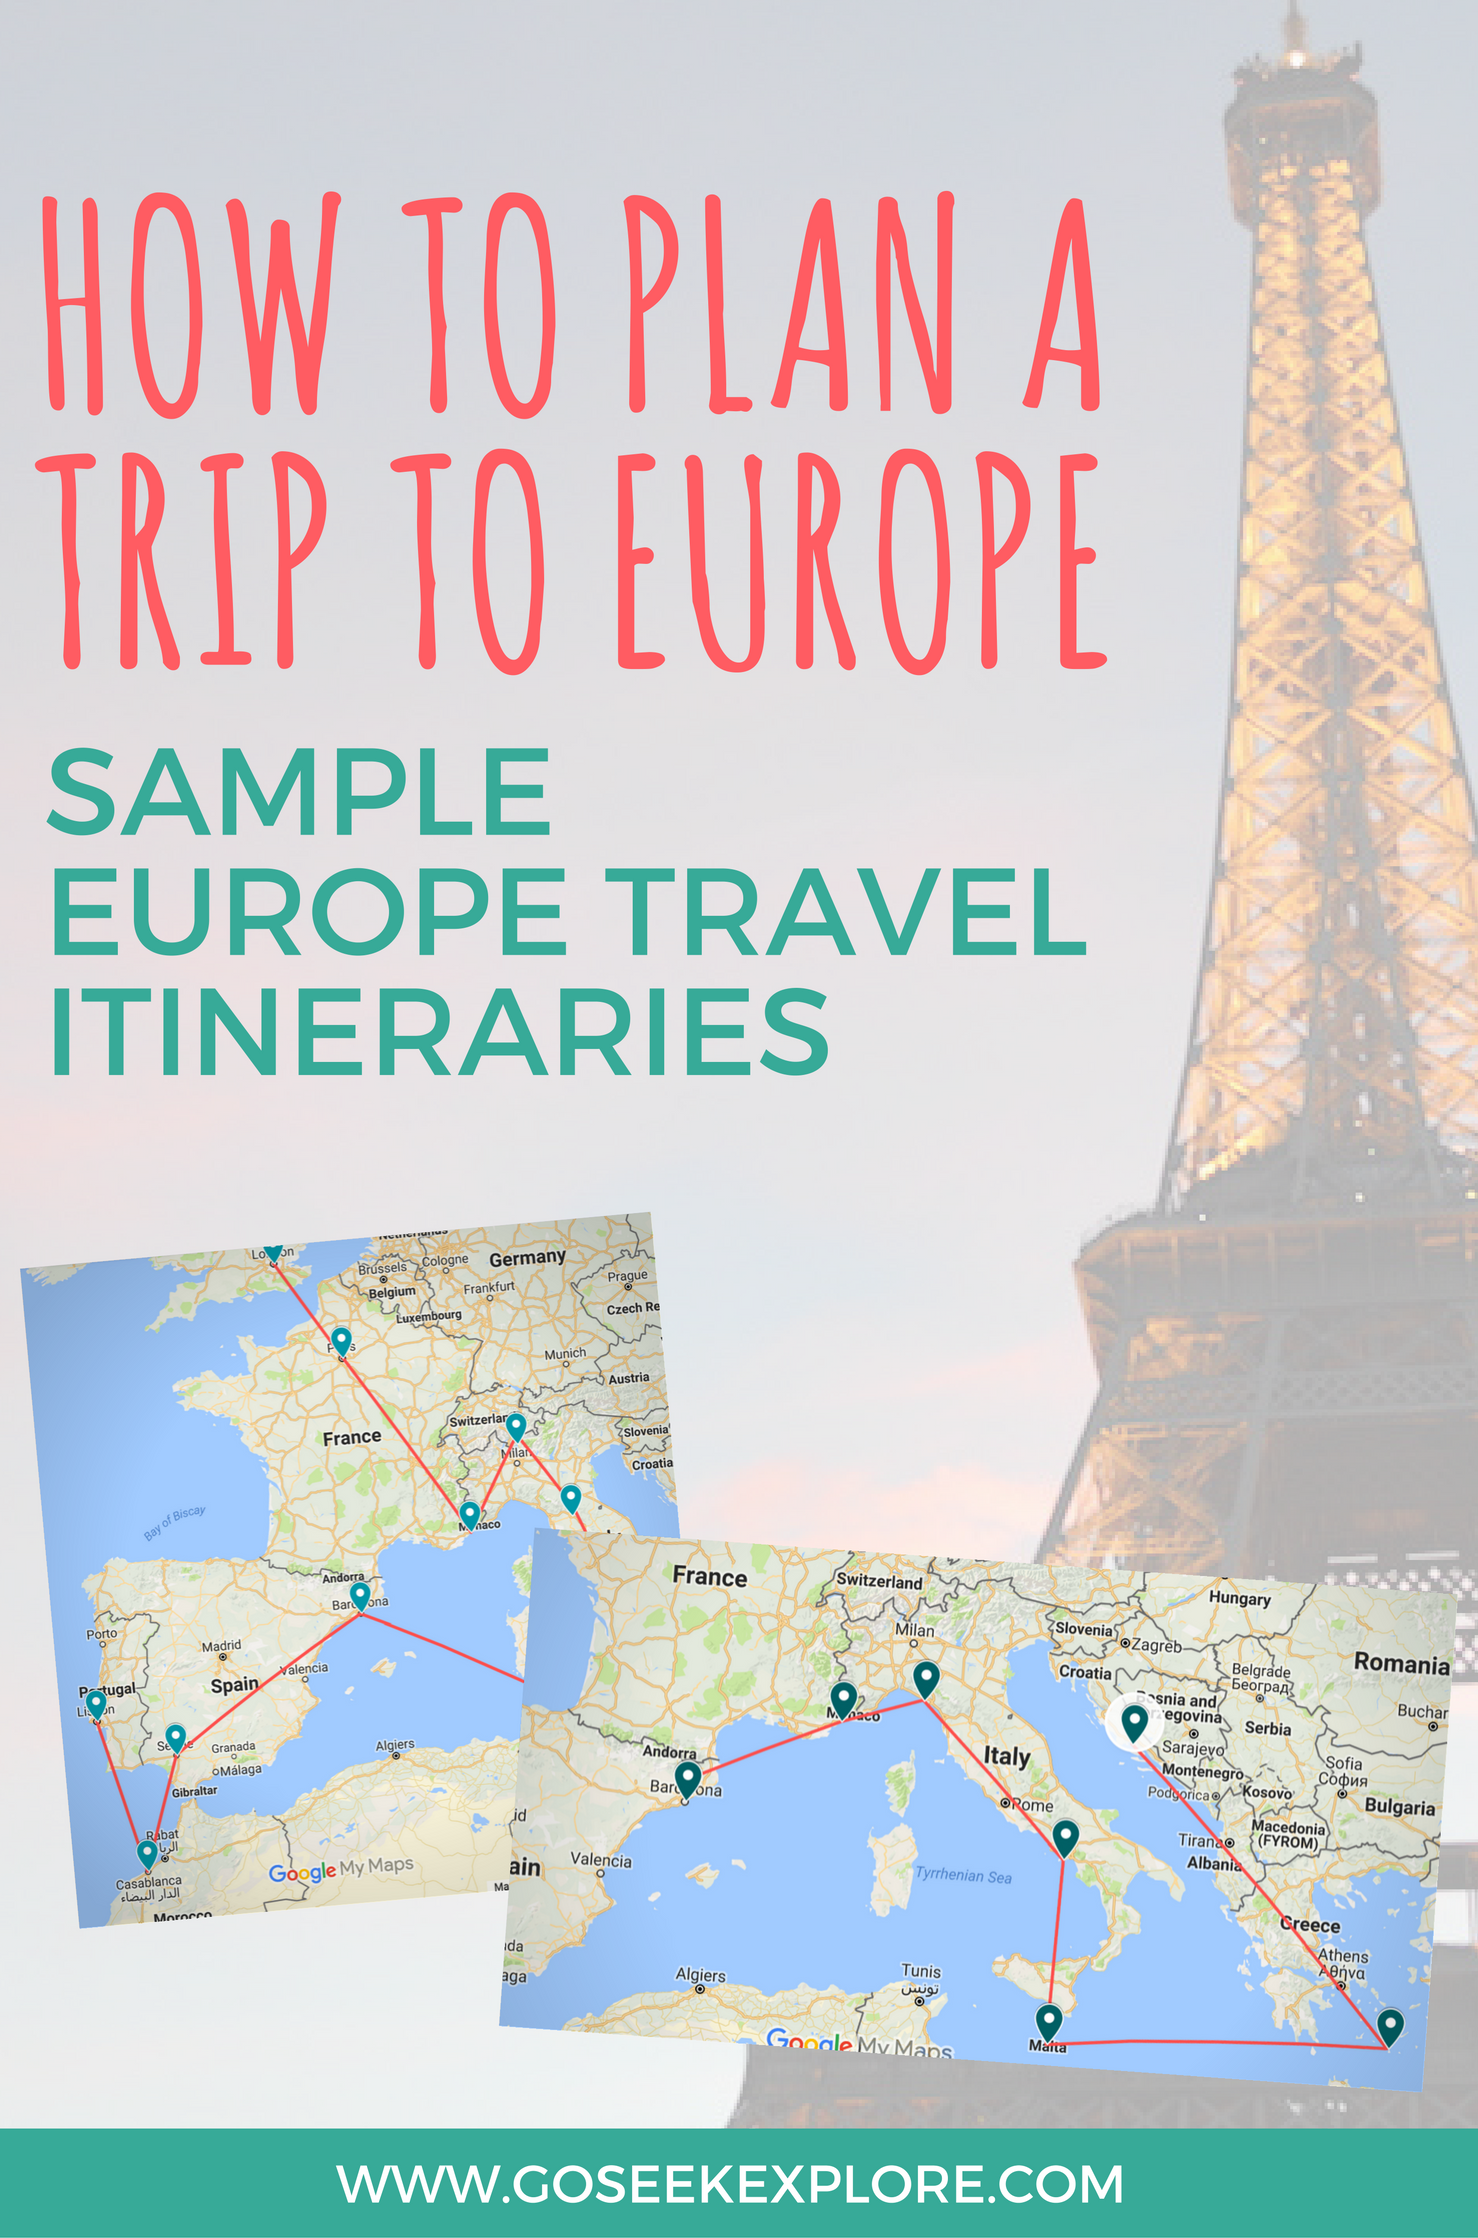 How To Plan a Trip to Europe: Sample Travel Itineraries